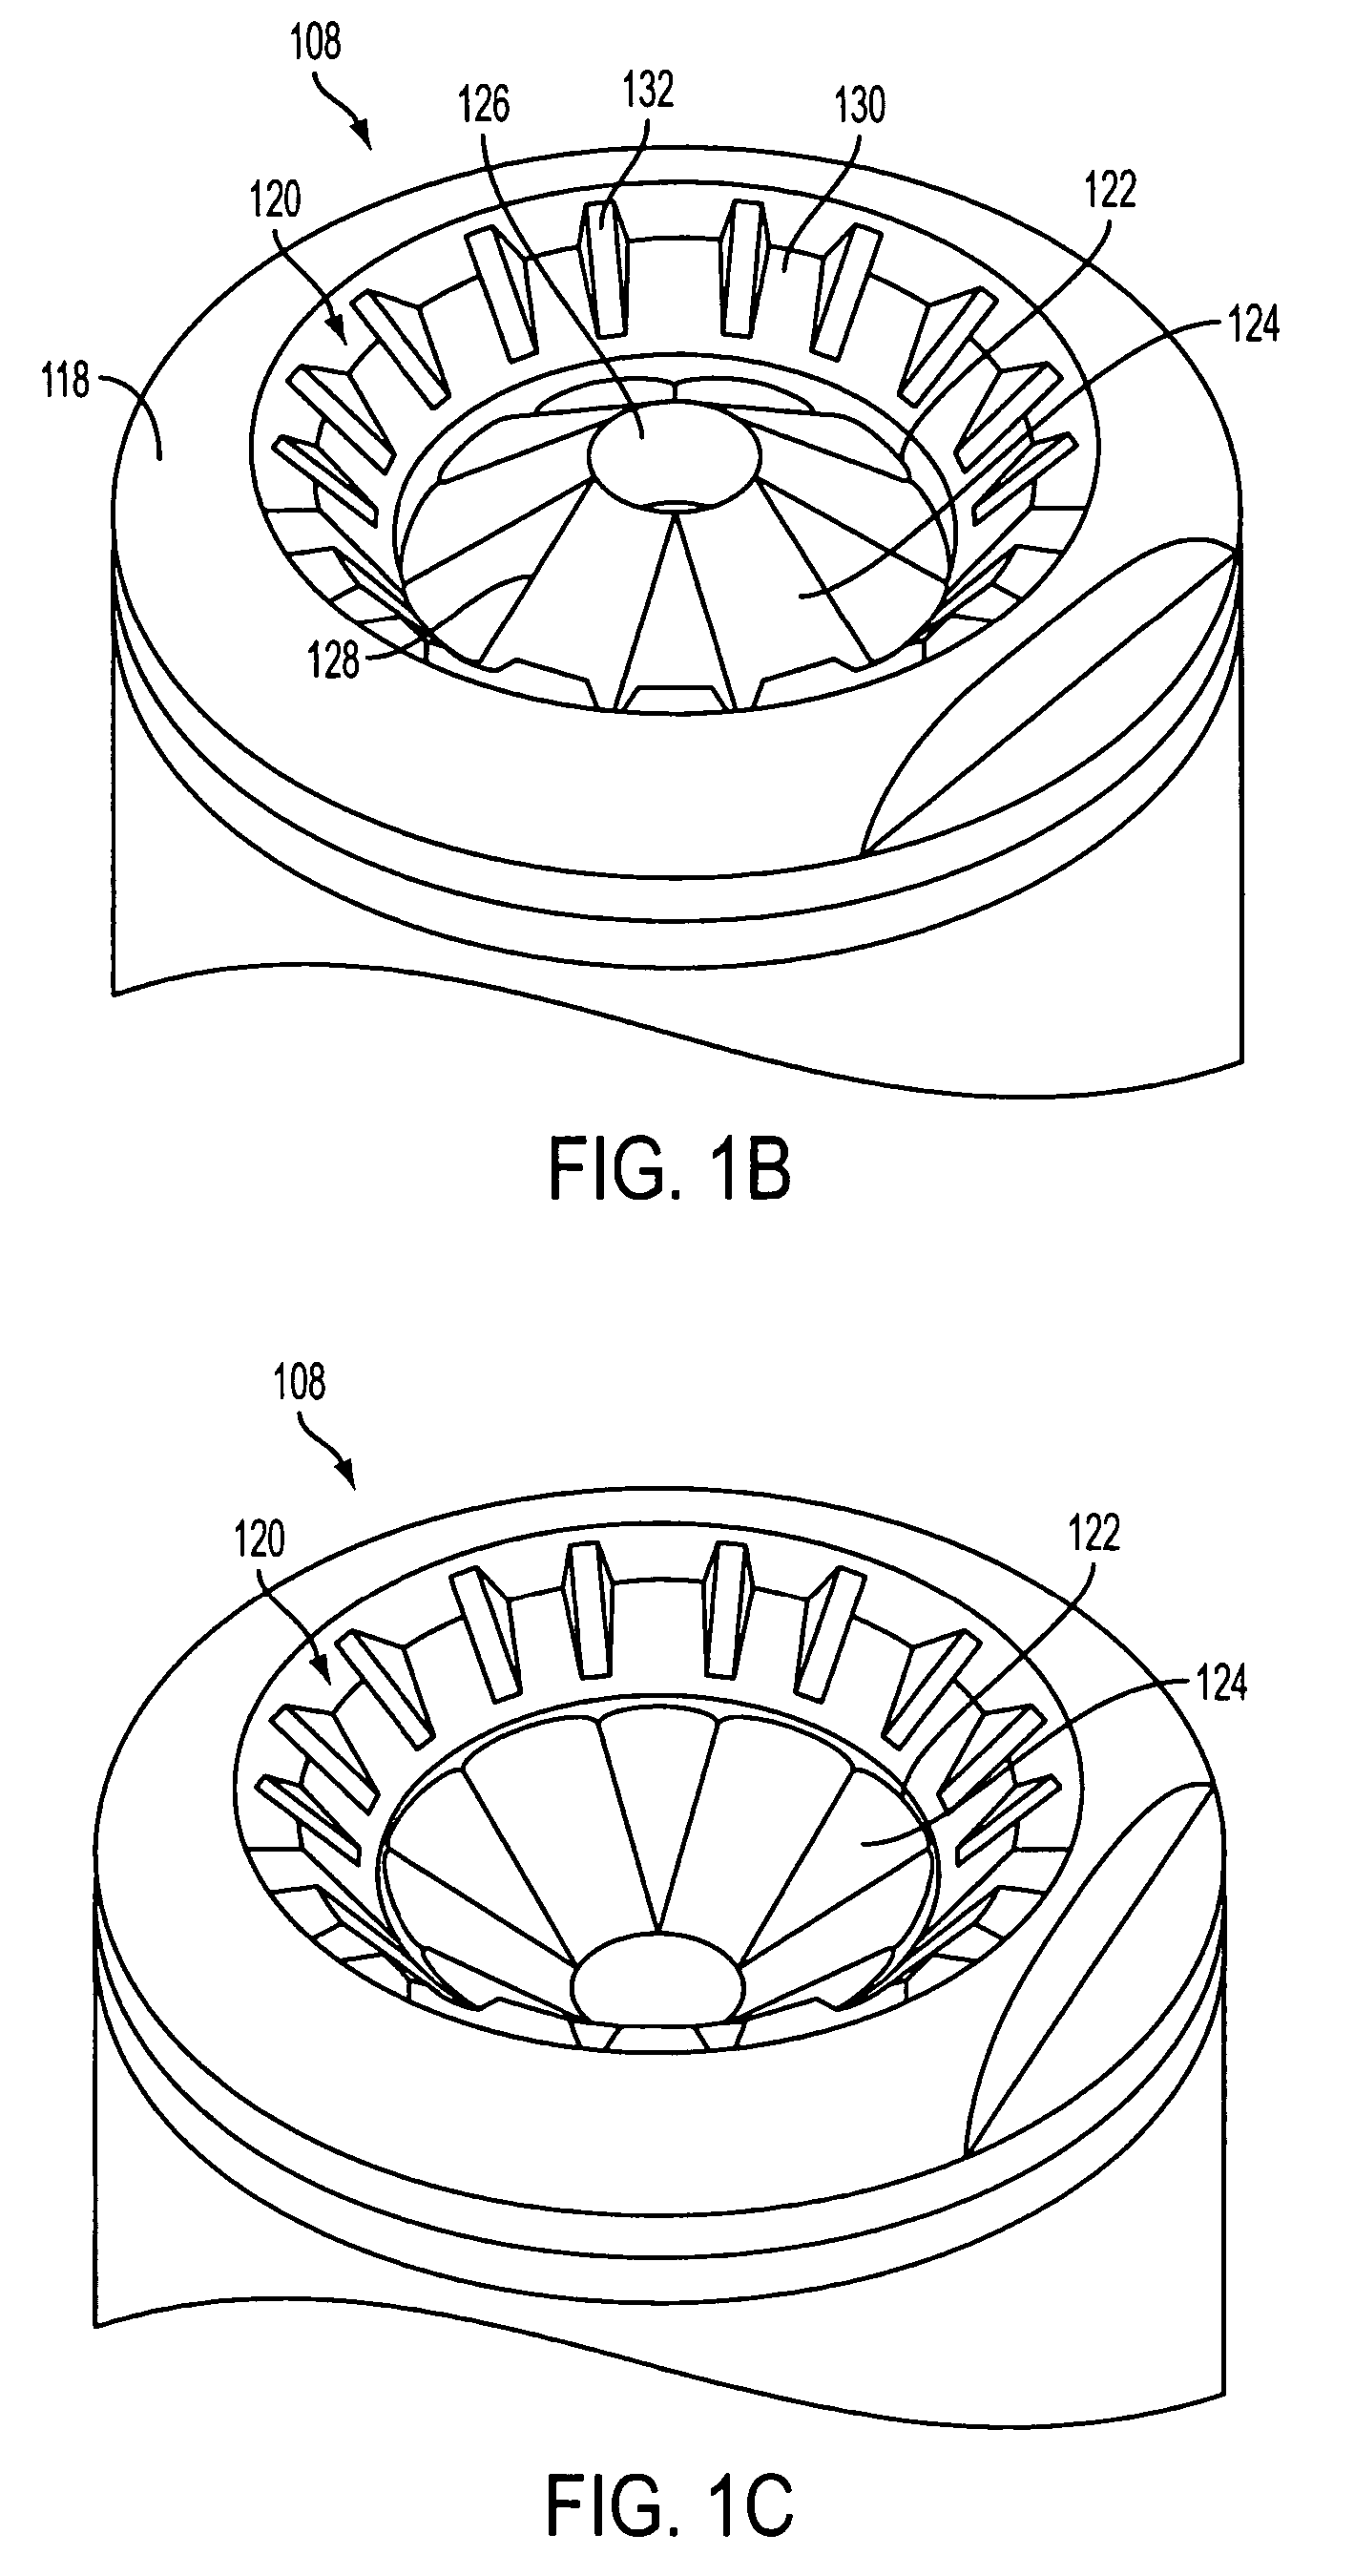 Method for handling a hot-filled container having a moveable portion to reduce a portion of a vacuum created therein